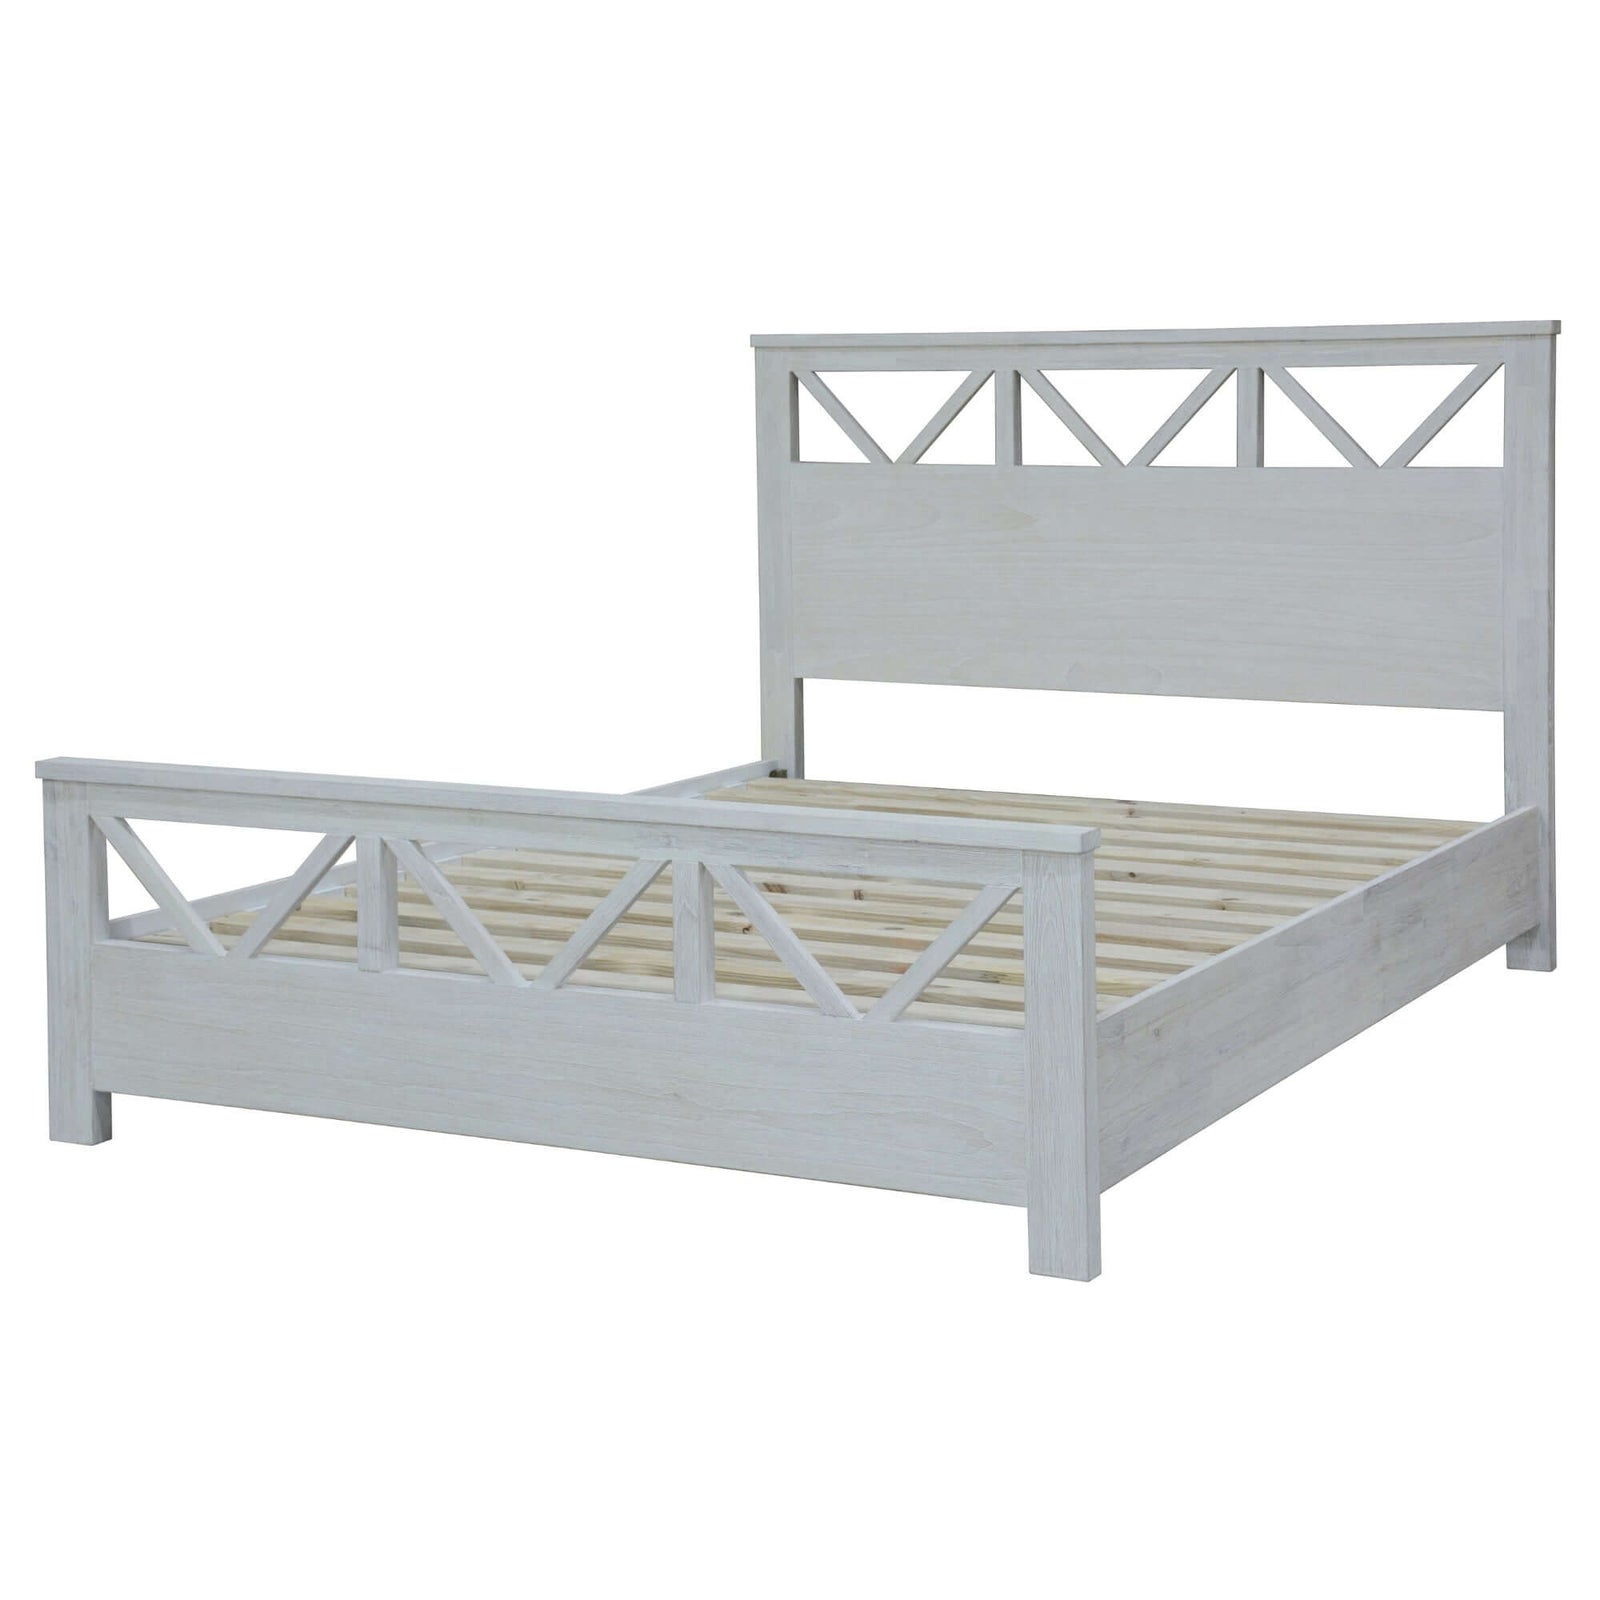 Myer Queen Size Bed Frame Solid Timber Wood Mattress Base White Wash-Upinteriors